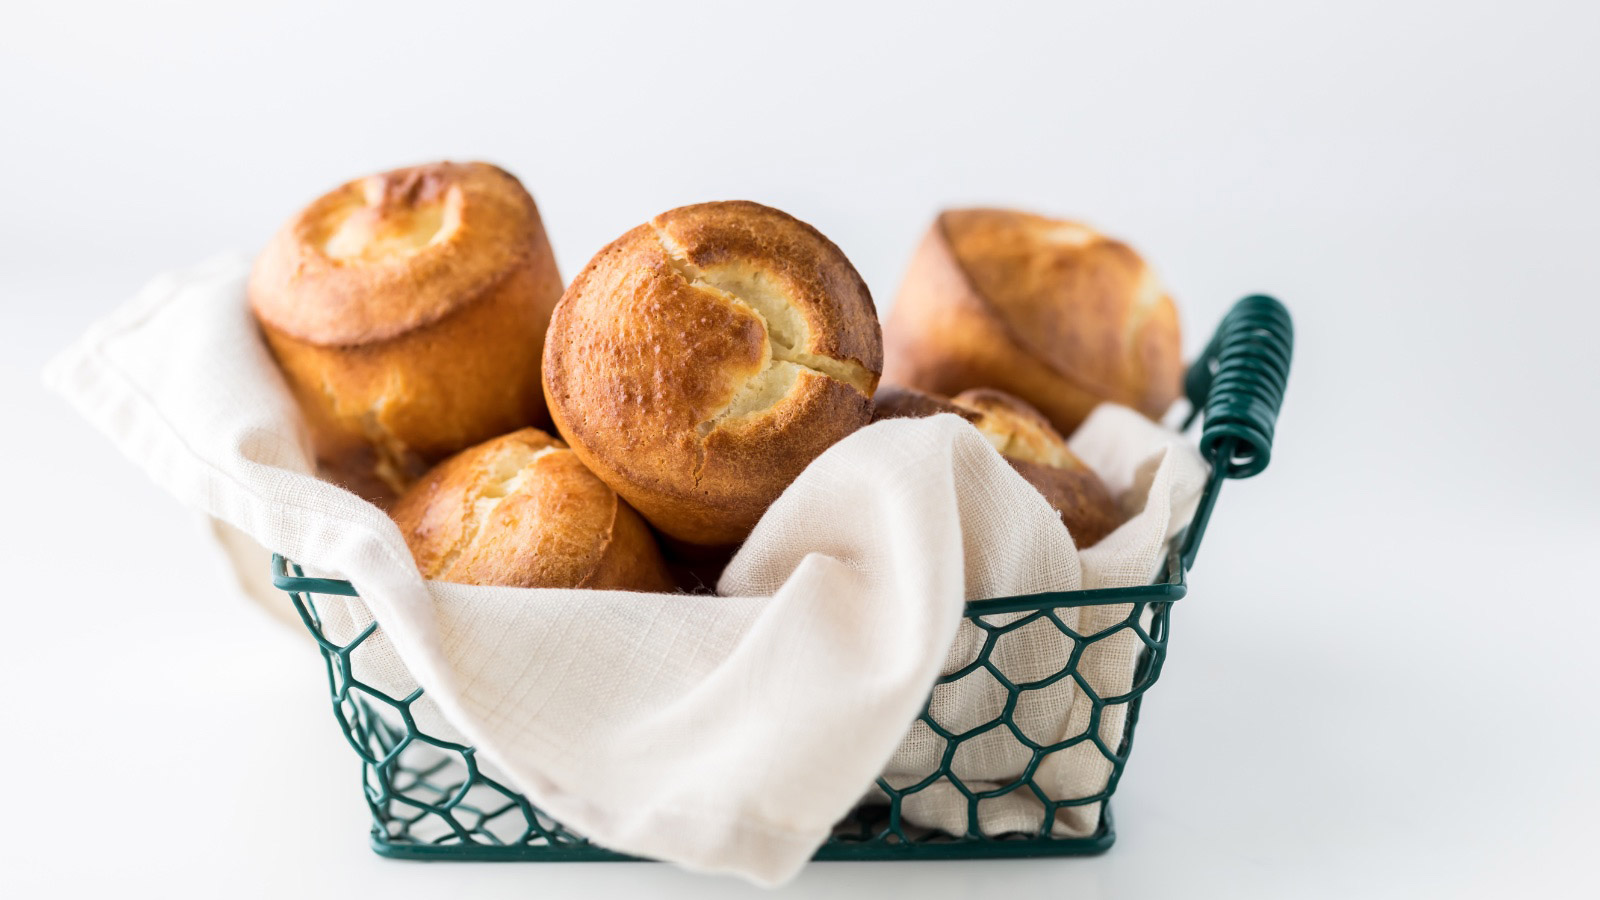 Close up of a basket of freshly baked popovers ready for sharing.